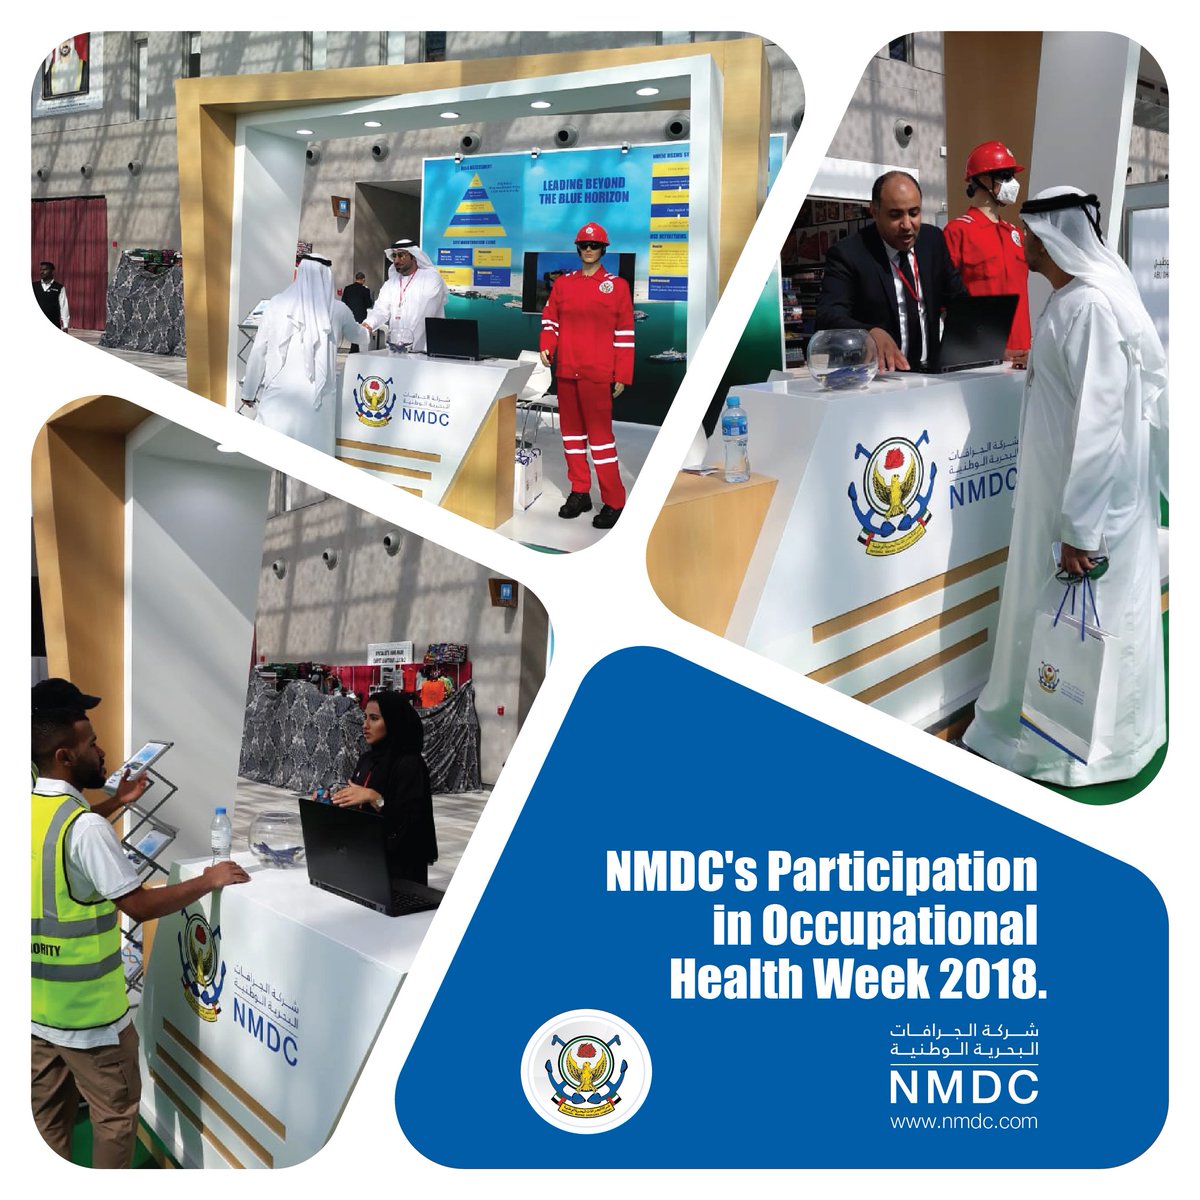 Our collective commitment is to fully integrate Health, Safety and Environment into our activities and in order to promote that #NMDC participated in @AbuDhabiPorts HSE week exhibition.

#Health #Safety #Environment #AbuDhabiPort #HSE #Exhibition #AbuDhabi #InAbuDhabi #UAE